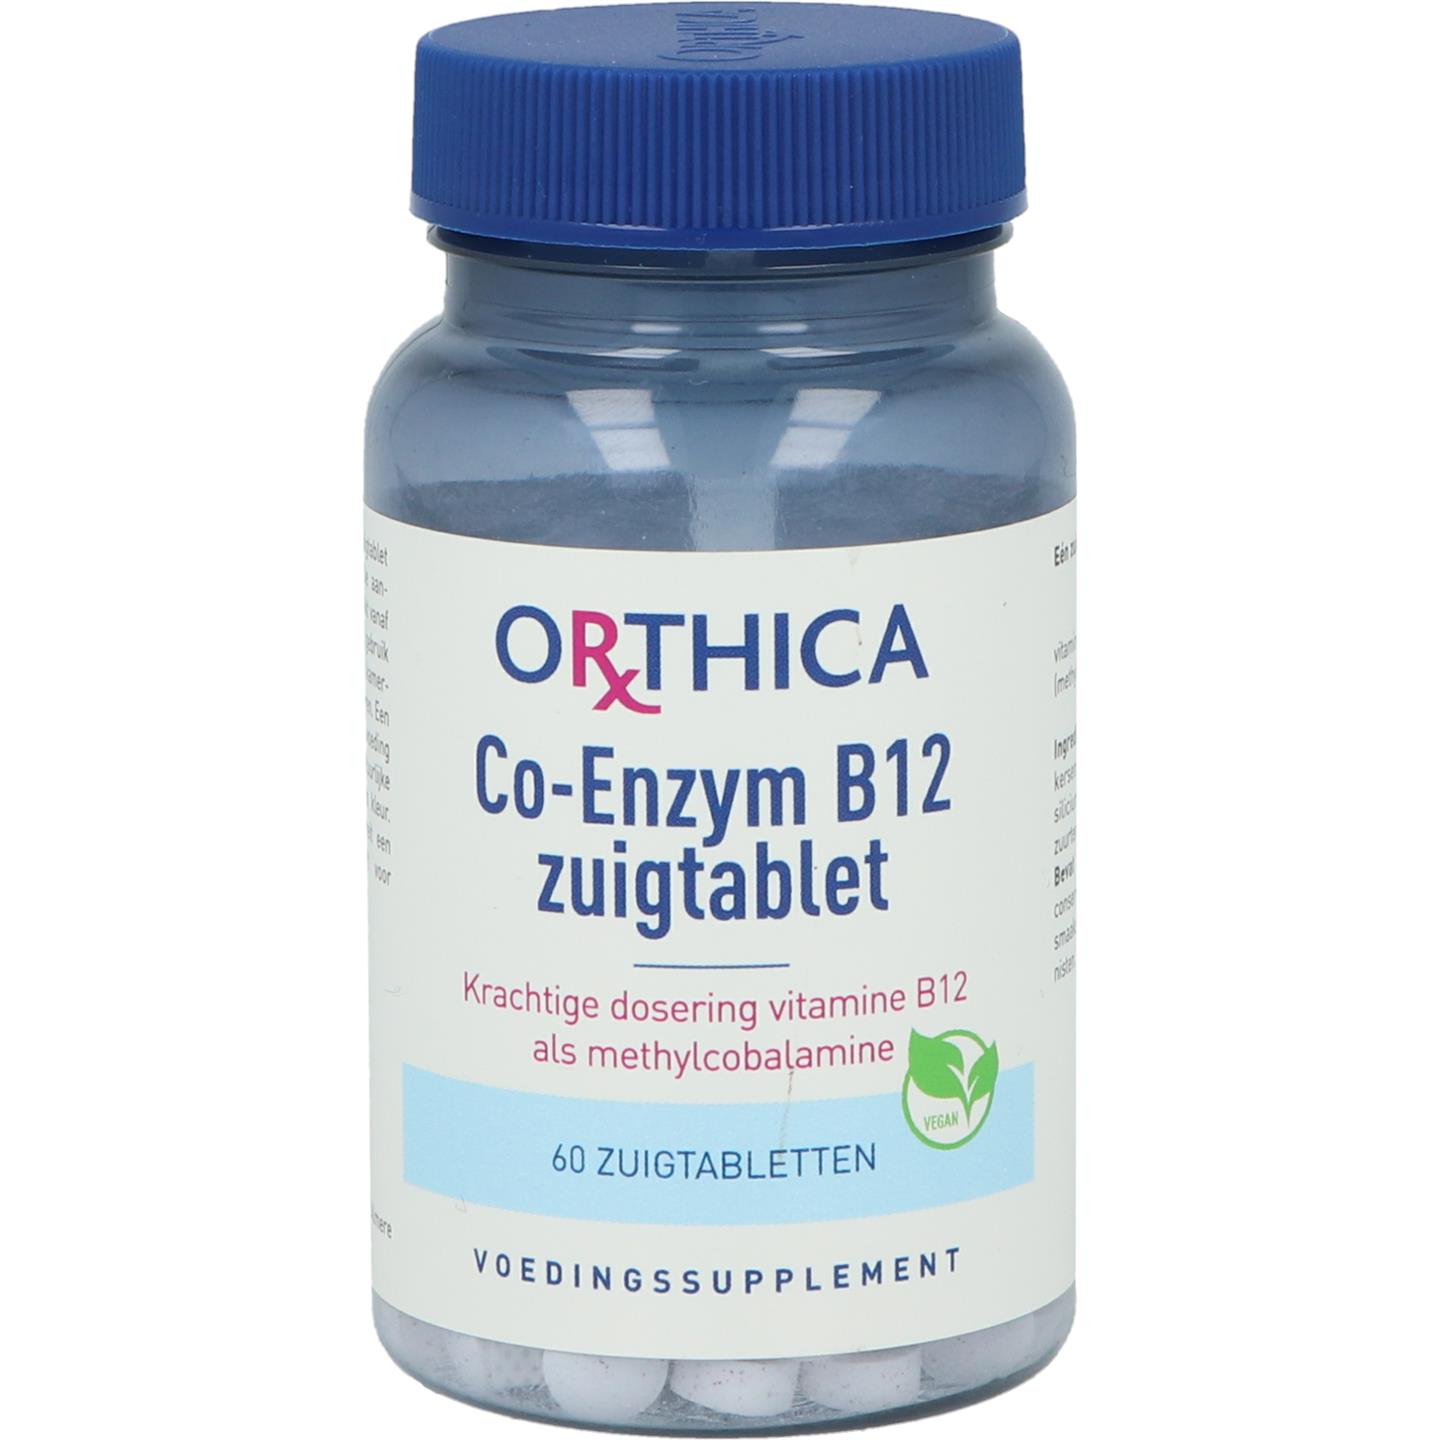 Co-enzym zuigtablet (Orthica)